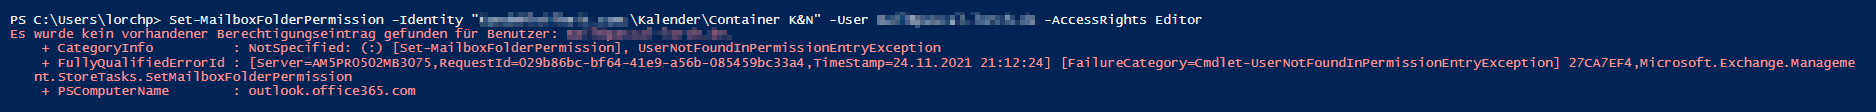 152396-2021-11-24-23-12-41-windows-powershell-ise.png